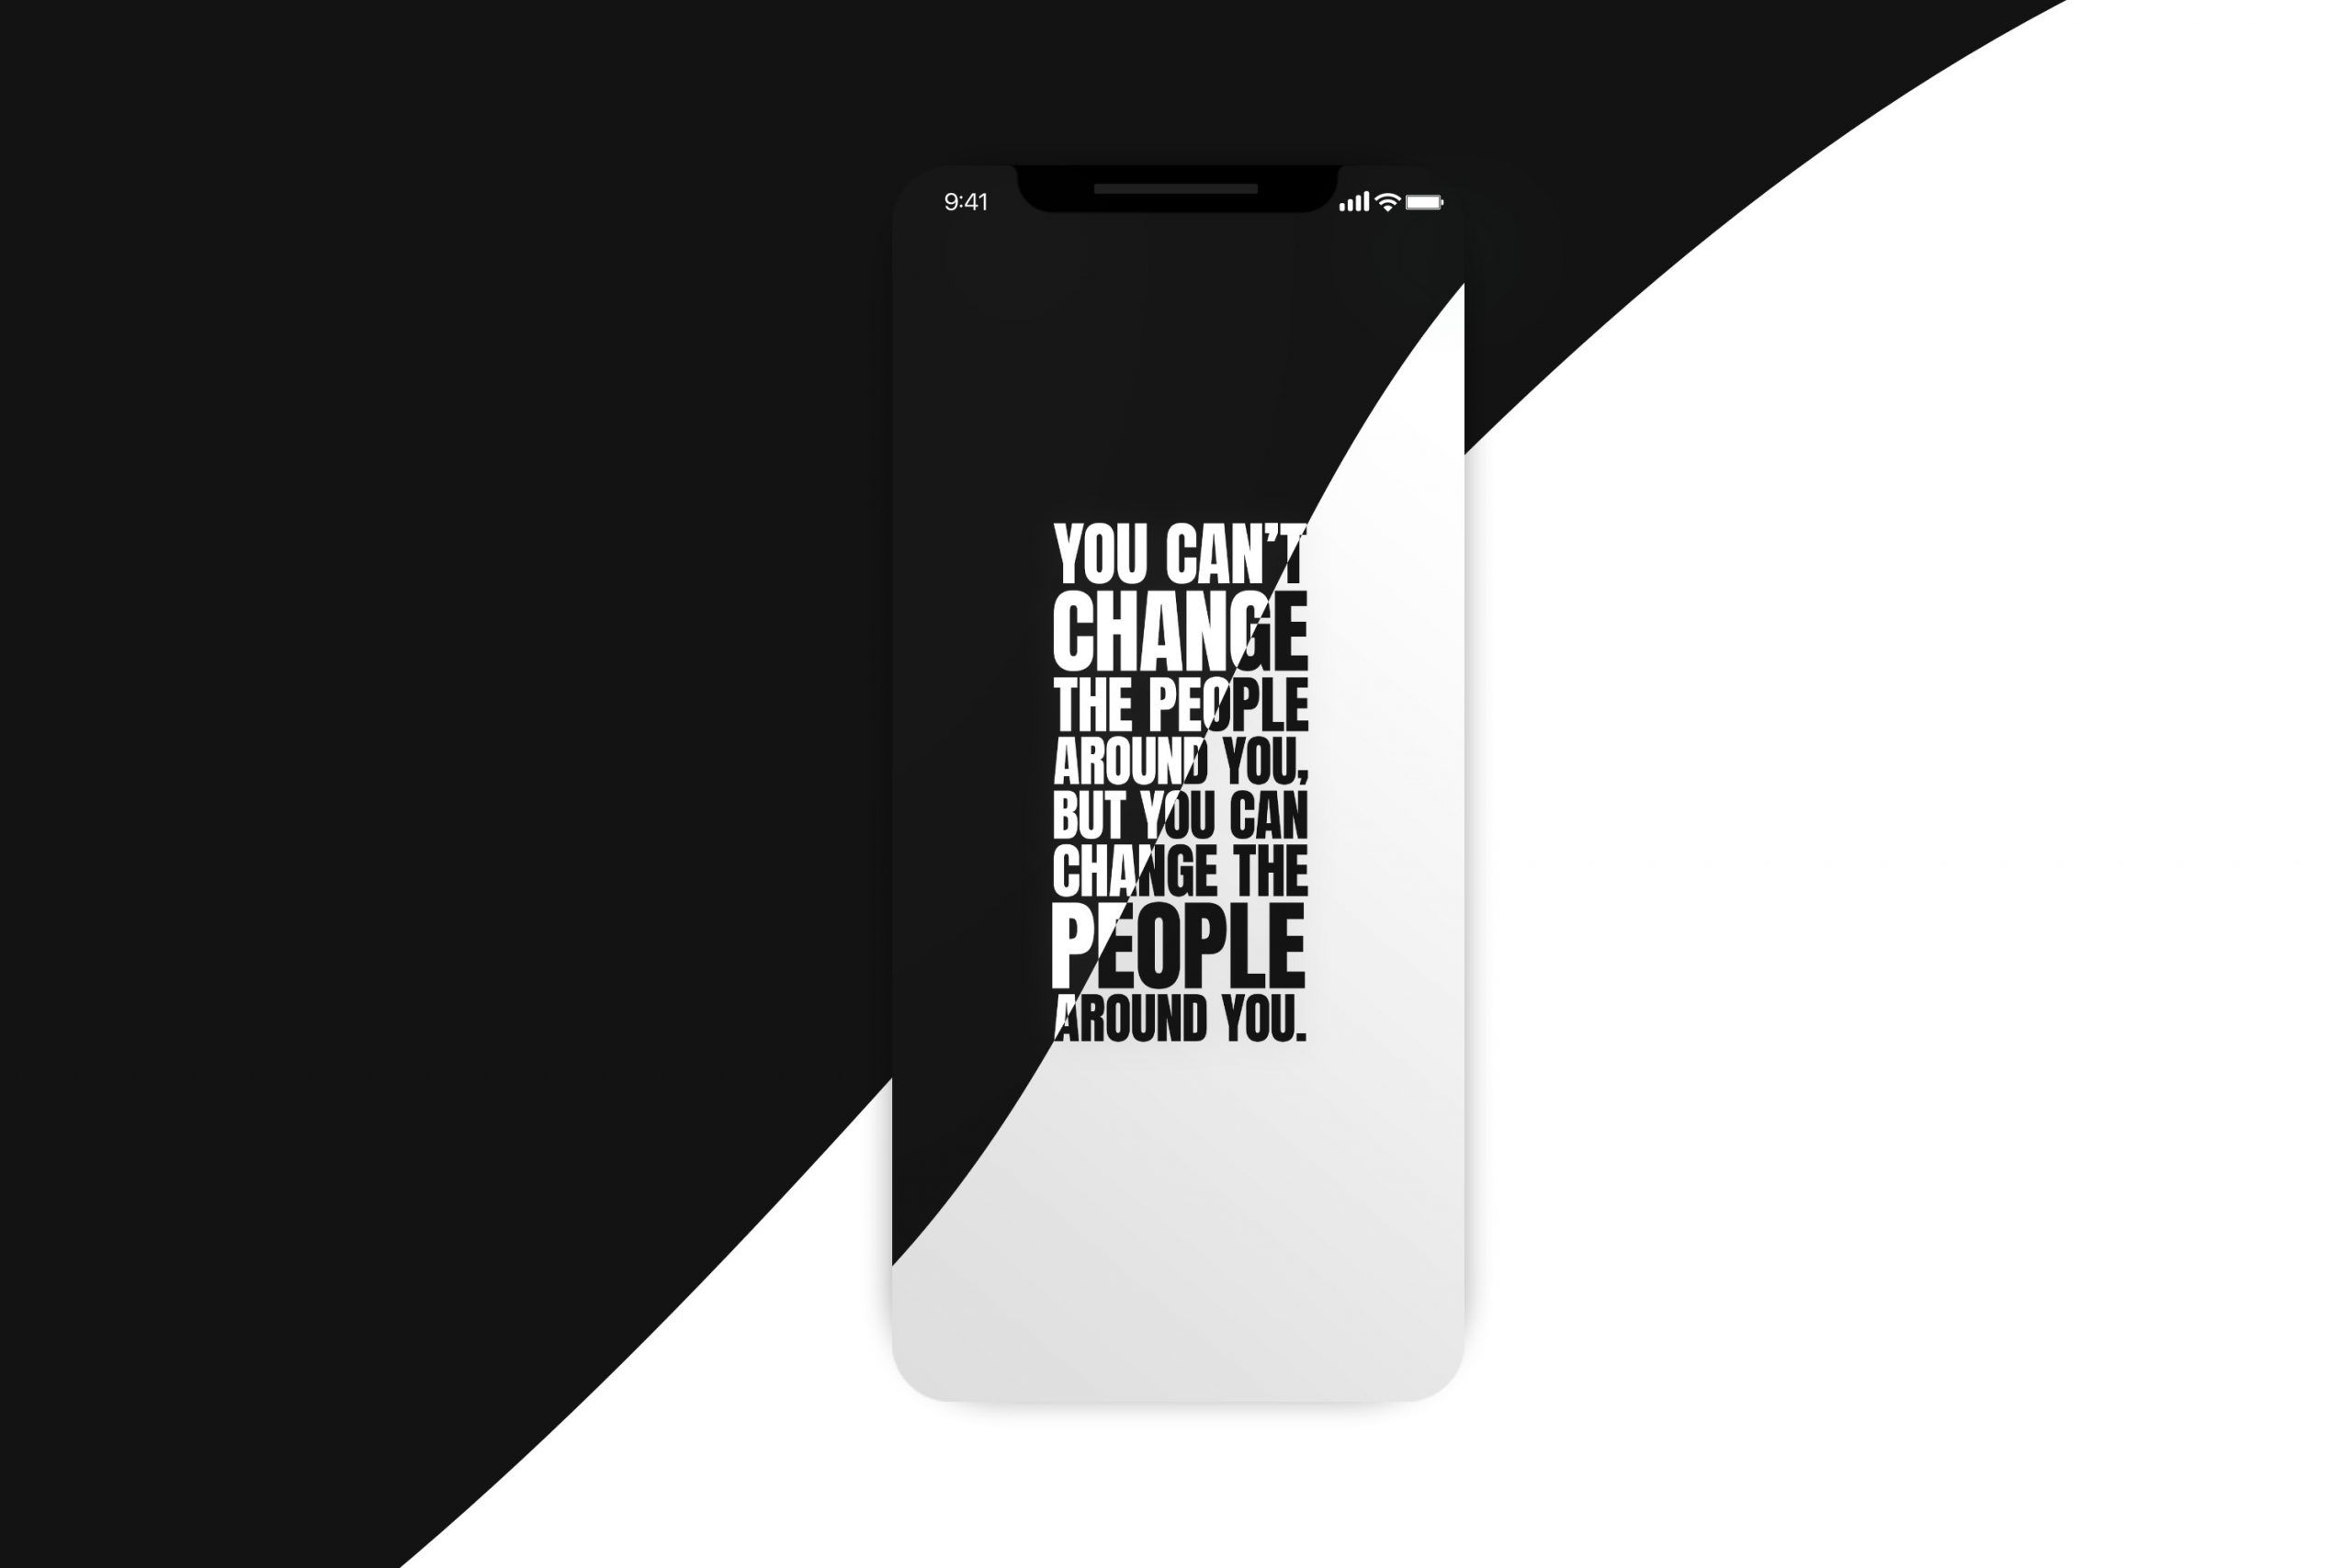 Wallpaper: You Can't Change the People Around You, but You Can